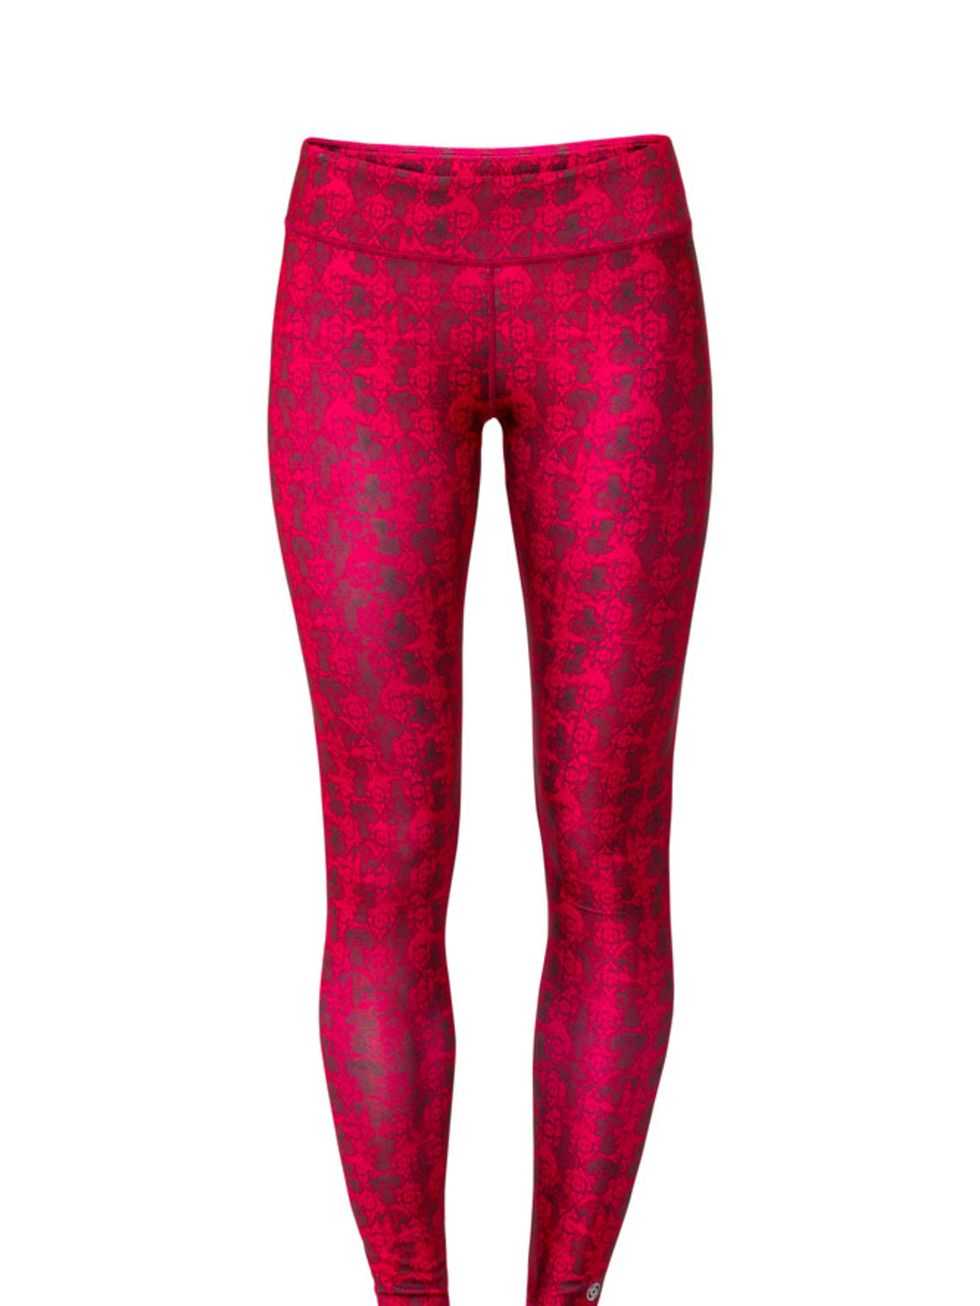 <p>Lija Printed Tight, £69 at <a href="http://www.houseoffraser.co.uk/LIJA+Dash+Run+Printed+Tight/205562643,default,pd.html" target="_blank">House of Fraser</a></p>